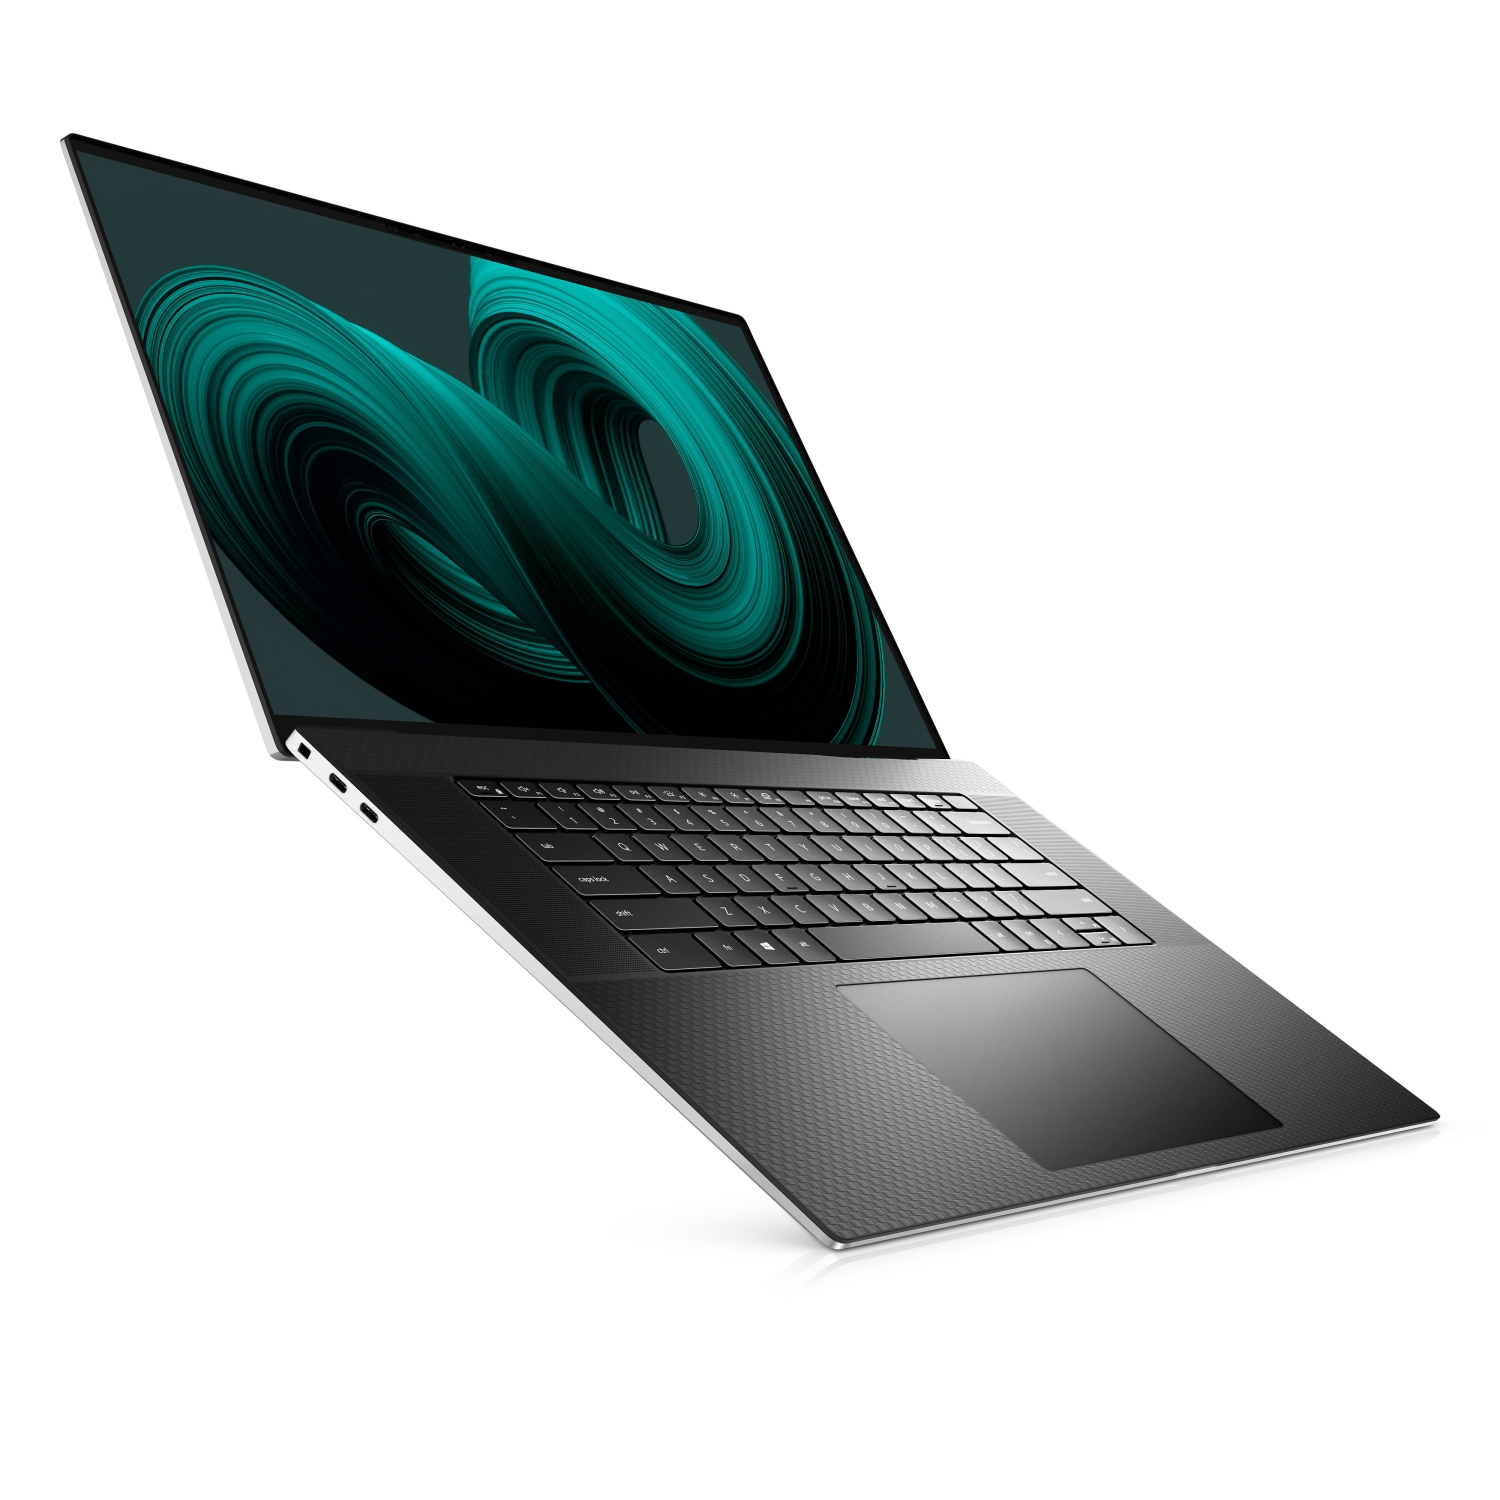 Refurbished (Excellent) - Dell XPS 17 9710 Laptop (2021) | 17" 4K Touch | Core i7 - 1TB SSD - 32GB RAM - RTX 3050 | 8 Cores @ 4.6 GHz - 11th Gen CPU Certified Refurbished